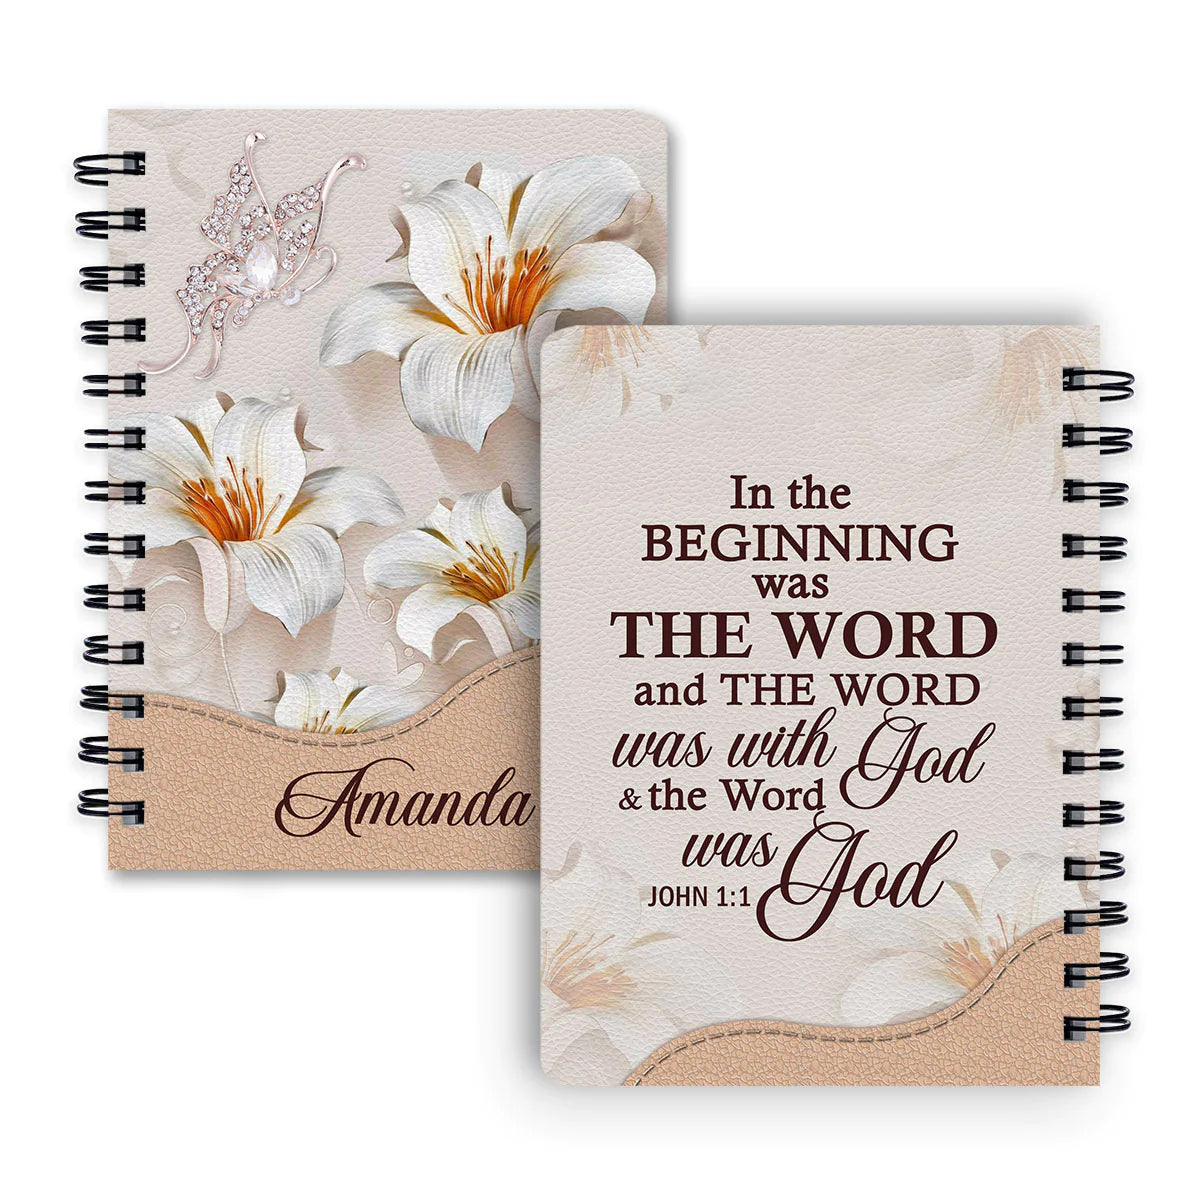 Christianart Spiral Journal, In The Beginning Was The Word, Personalized Spiral Journal, Jesus Spiral Journal. - Christian Art Bag